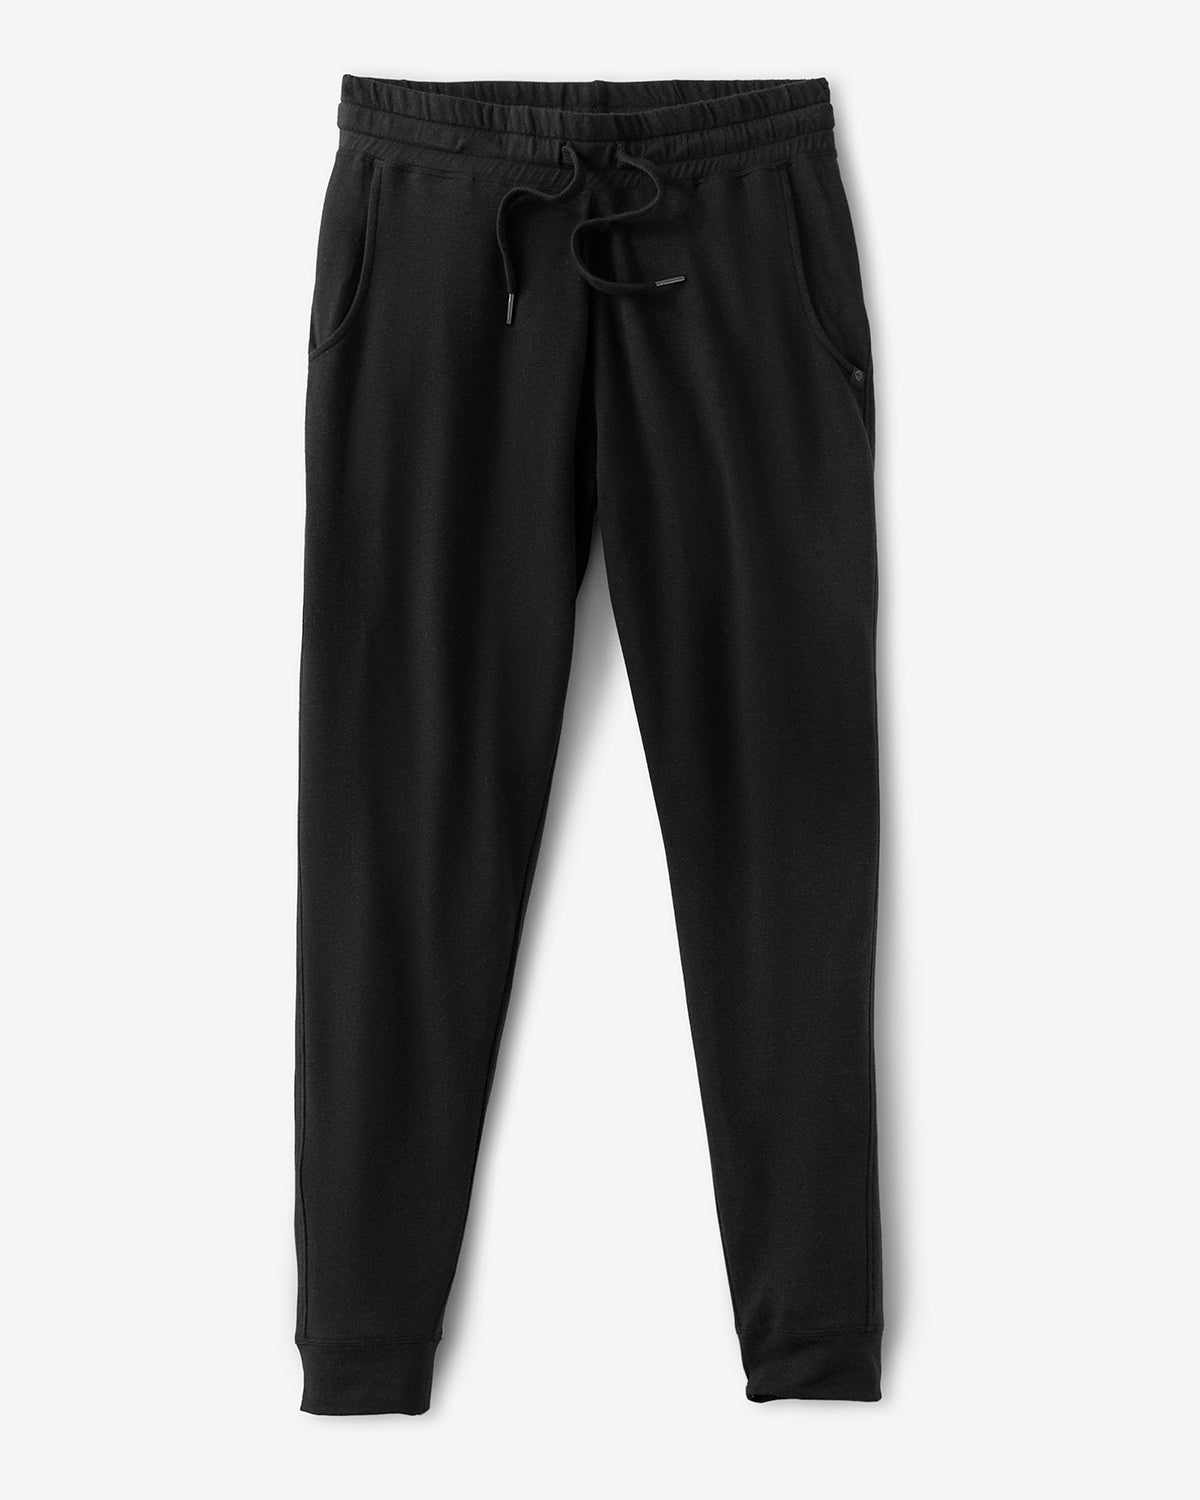 Daily Practice by Anthropologie Lightweight Joggers | Anthropologie